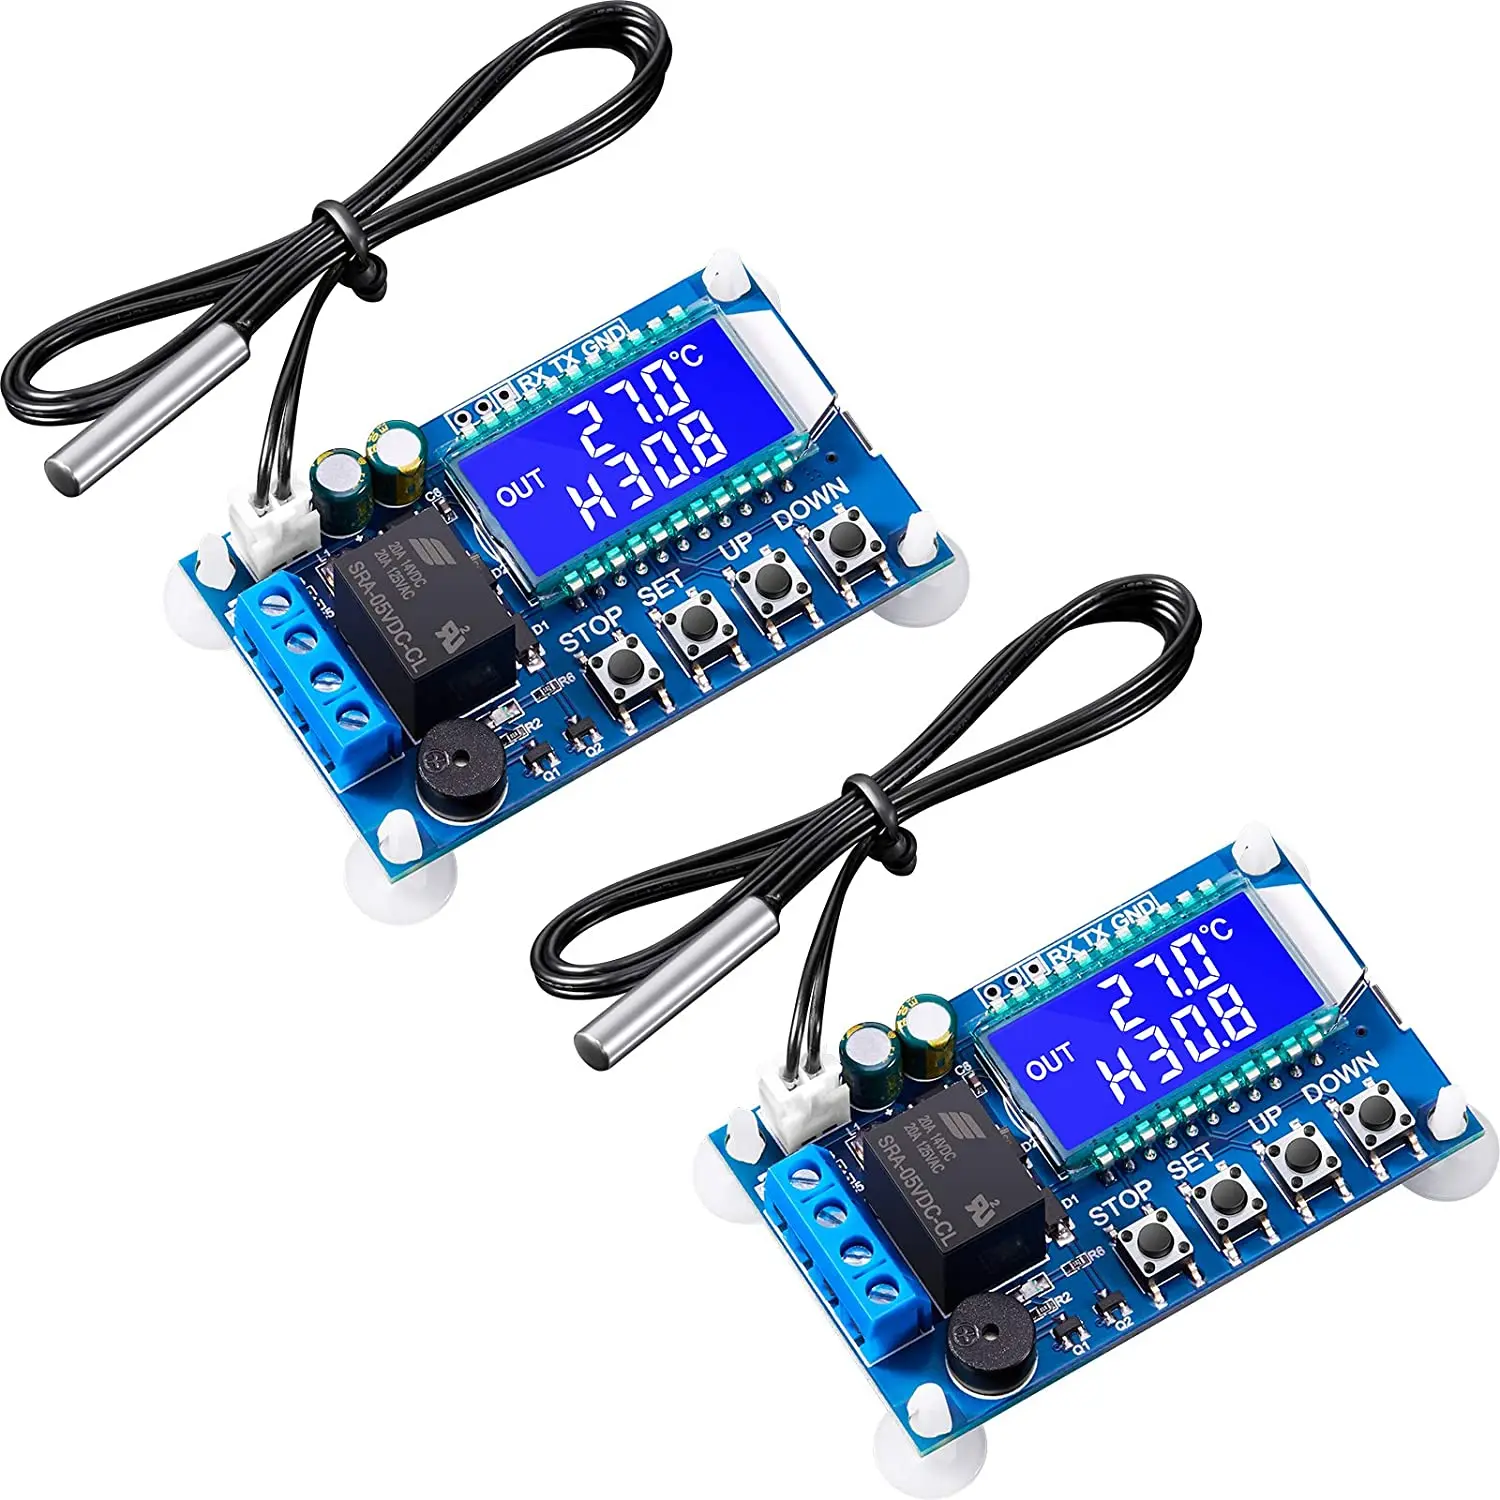 

2Pcs XY-T01 Electronic Temperature Controller Control Module -50Celsius to 100Celsius Temperature Control Switch Boards